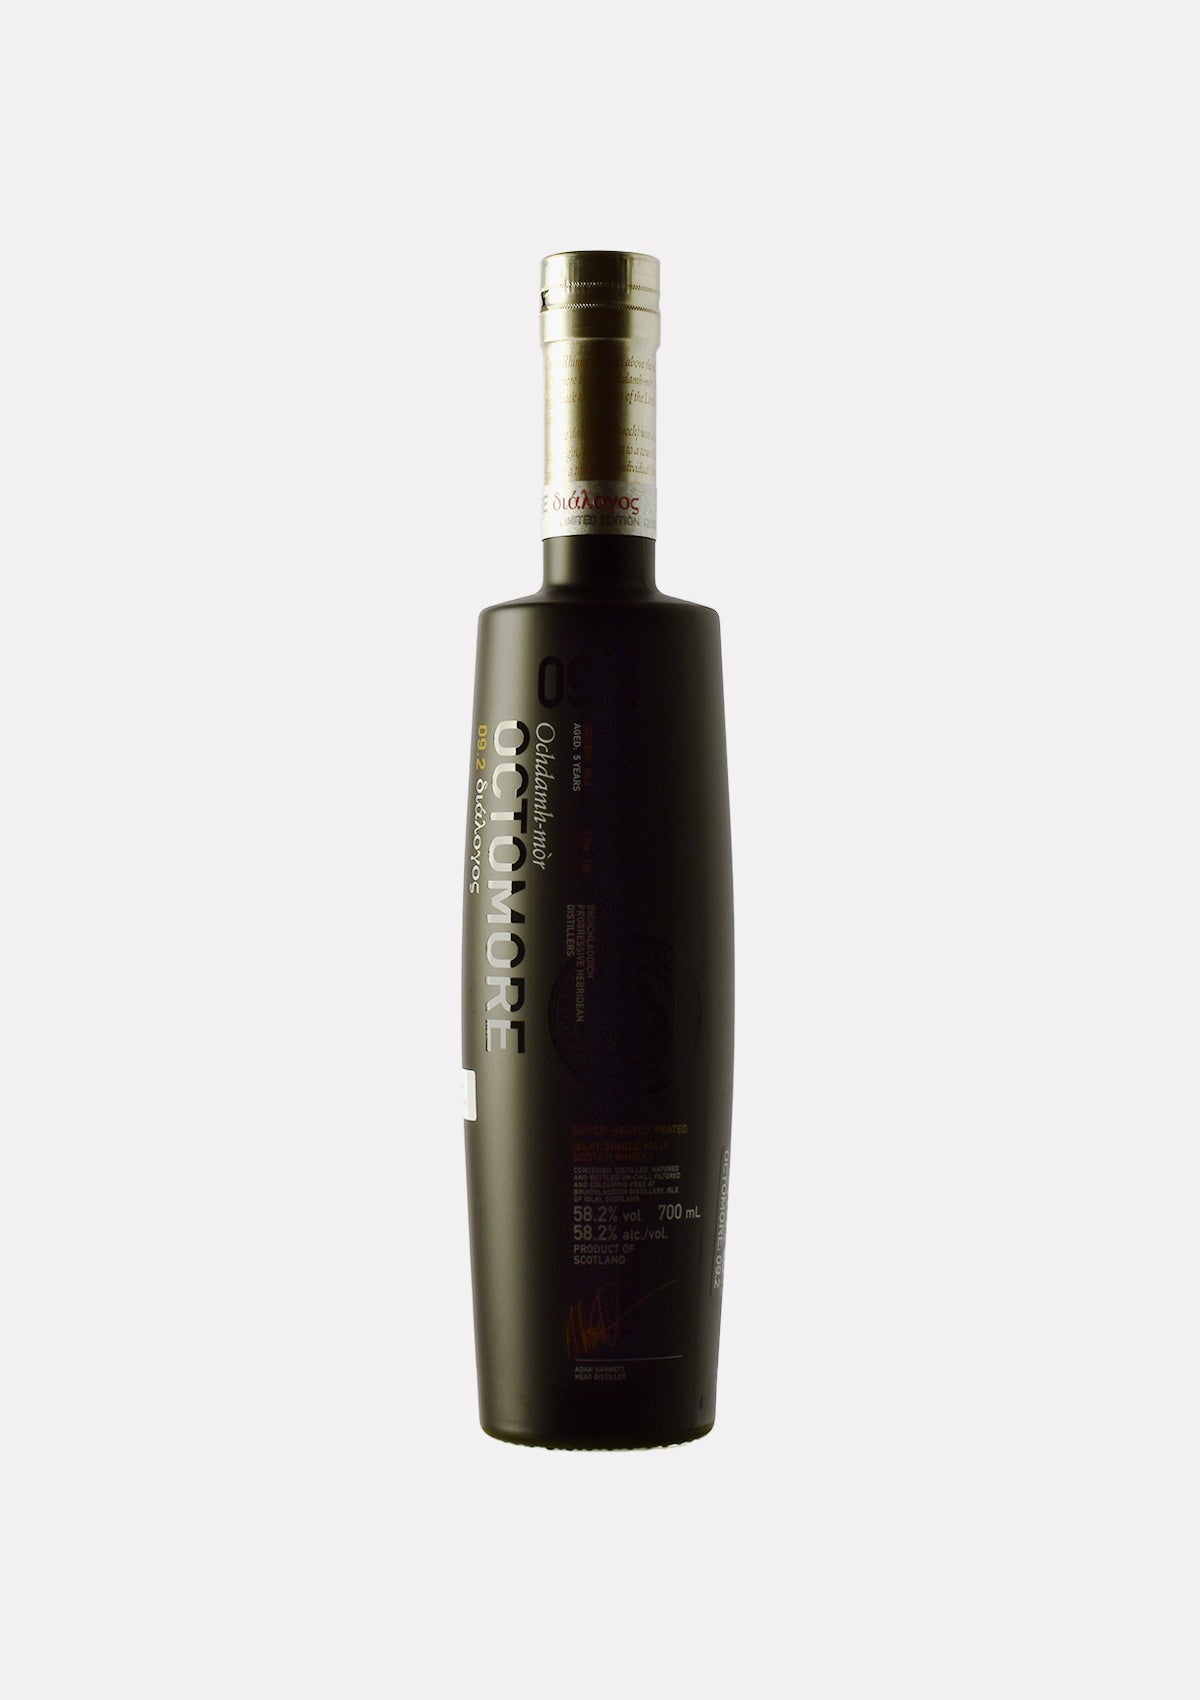 Octomore 09.2 156 ppm